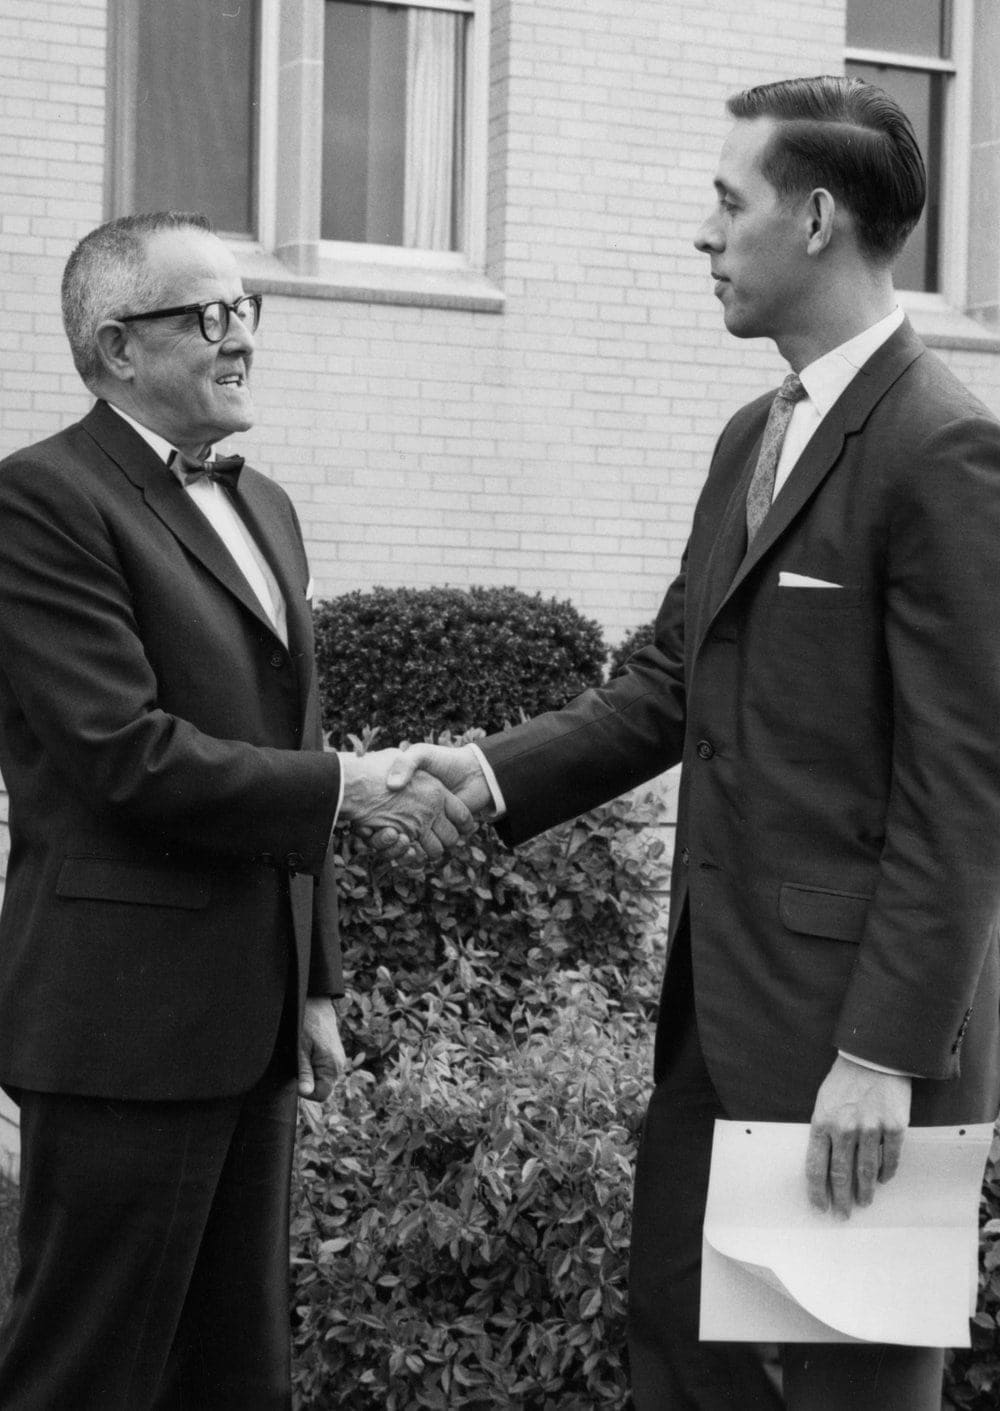 <strong>ALMA MATER:</strong> Lee Boothby, right, shaking hands with evangelist Fordyce W. Detamore in 1967 at his alma mater Andrews University, where he served as a member of the board of trustees. Credit: Center for Adventist Research Image Database